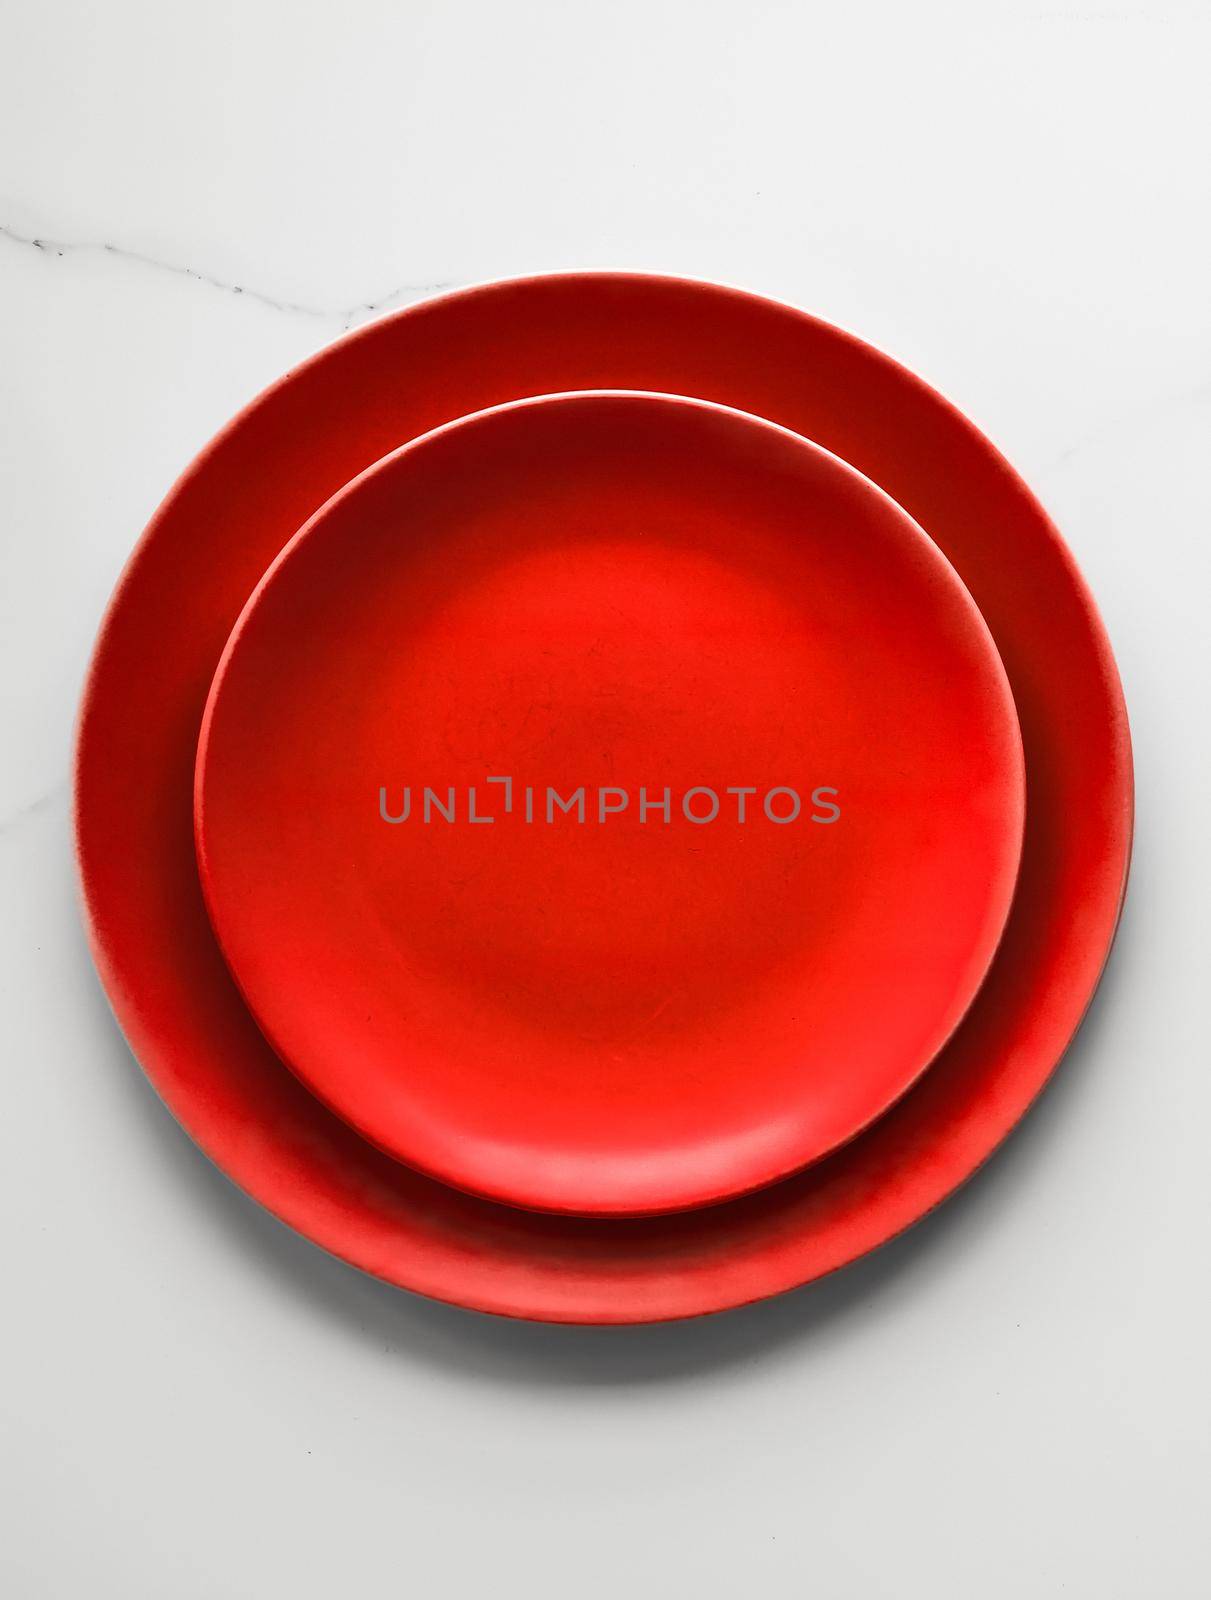 empty red plate on marble - recipe and restaurant mockup flatlay styled concept